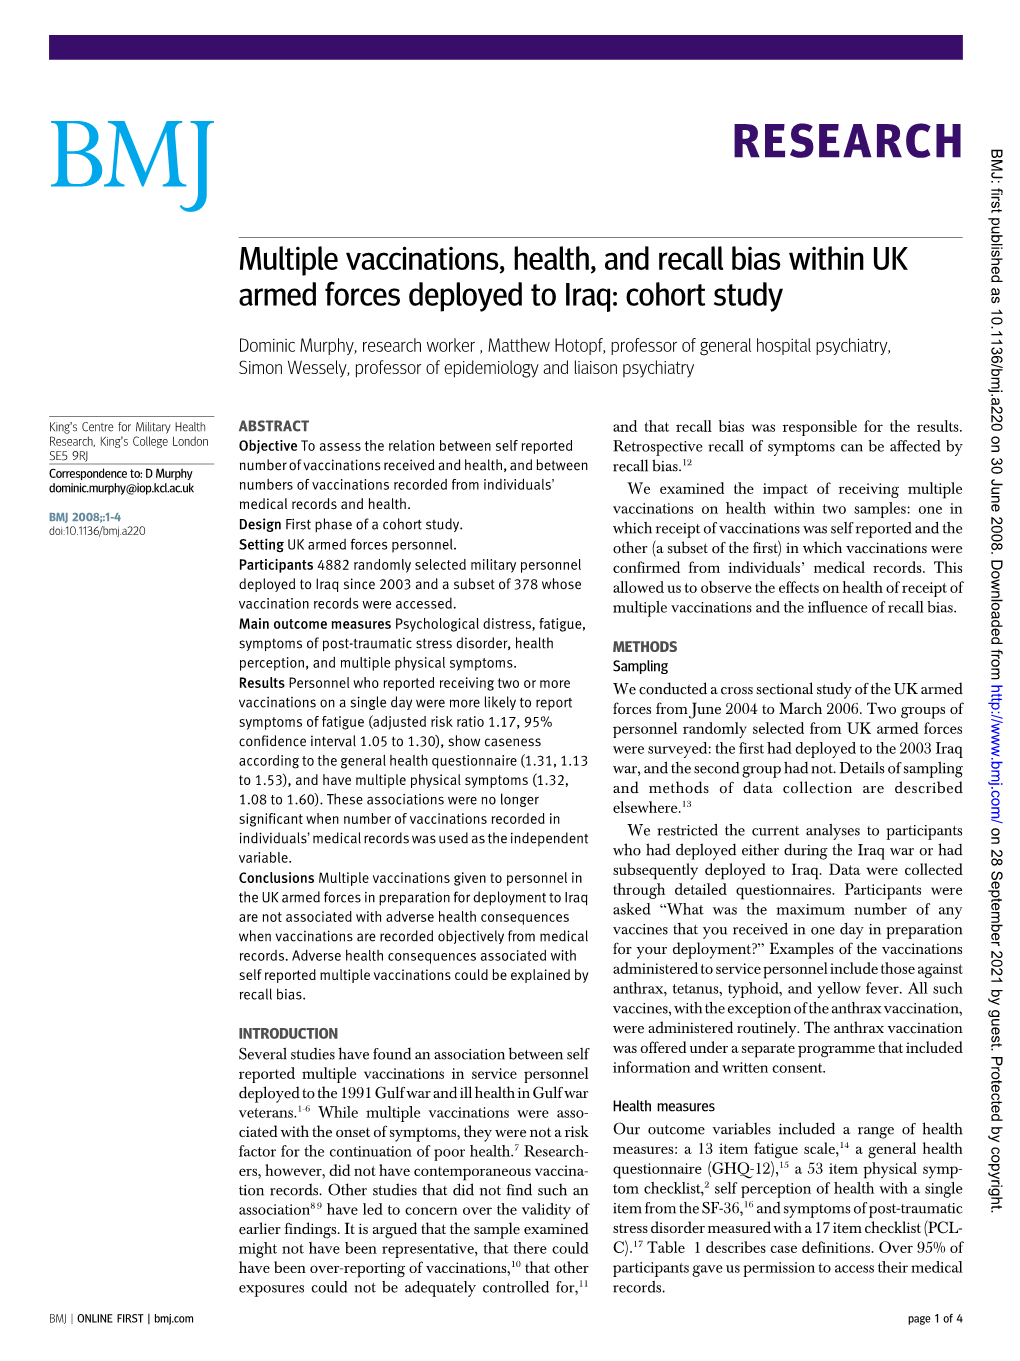 Multiple Vaccinations, Health, and Recall Bias Within UK Armed Forces Deployed to Iraq: Cohort Study